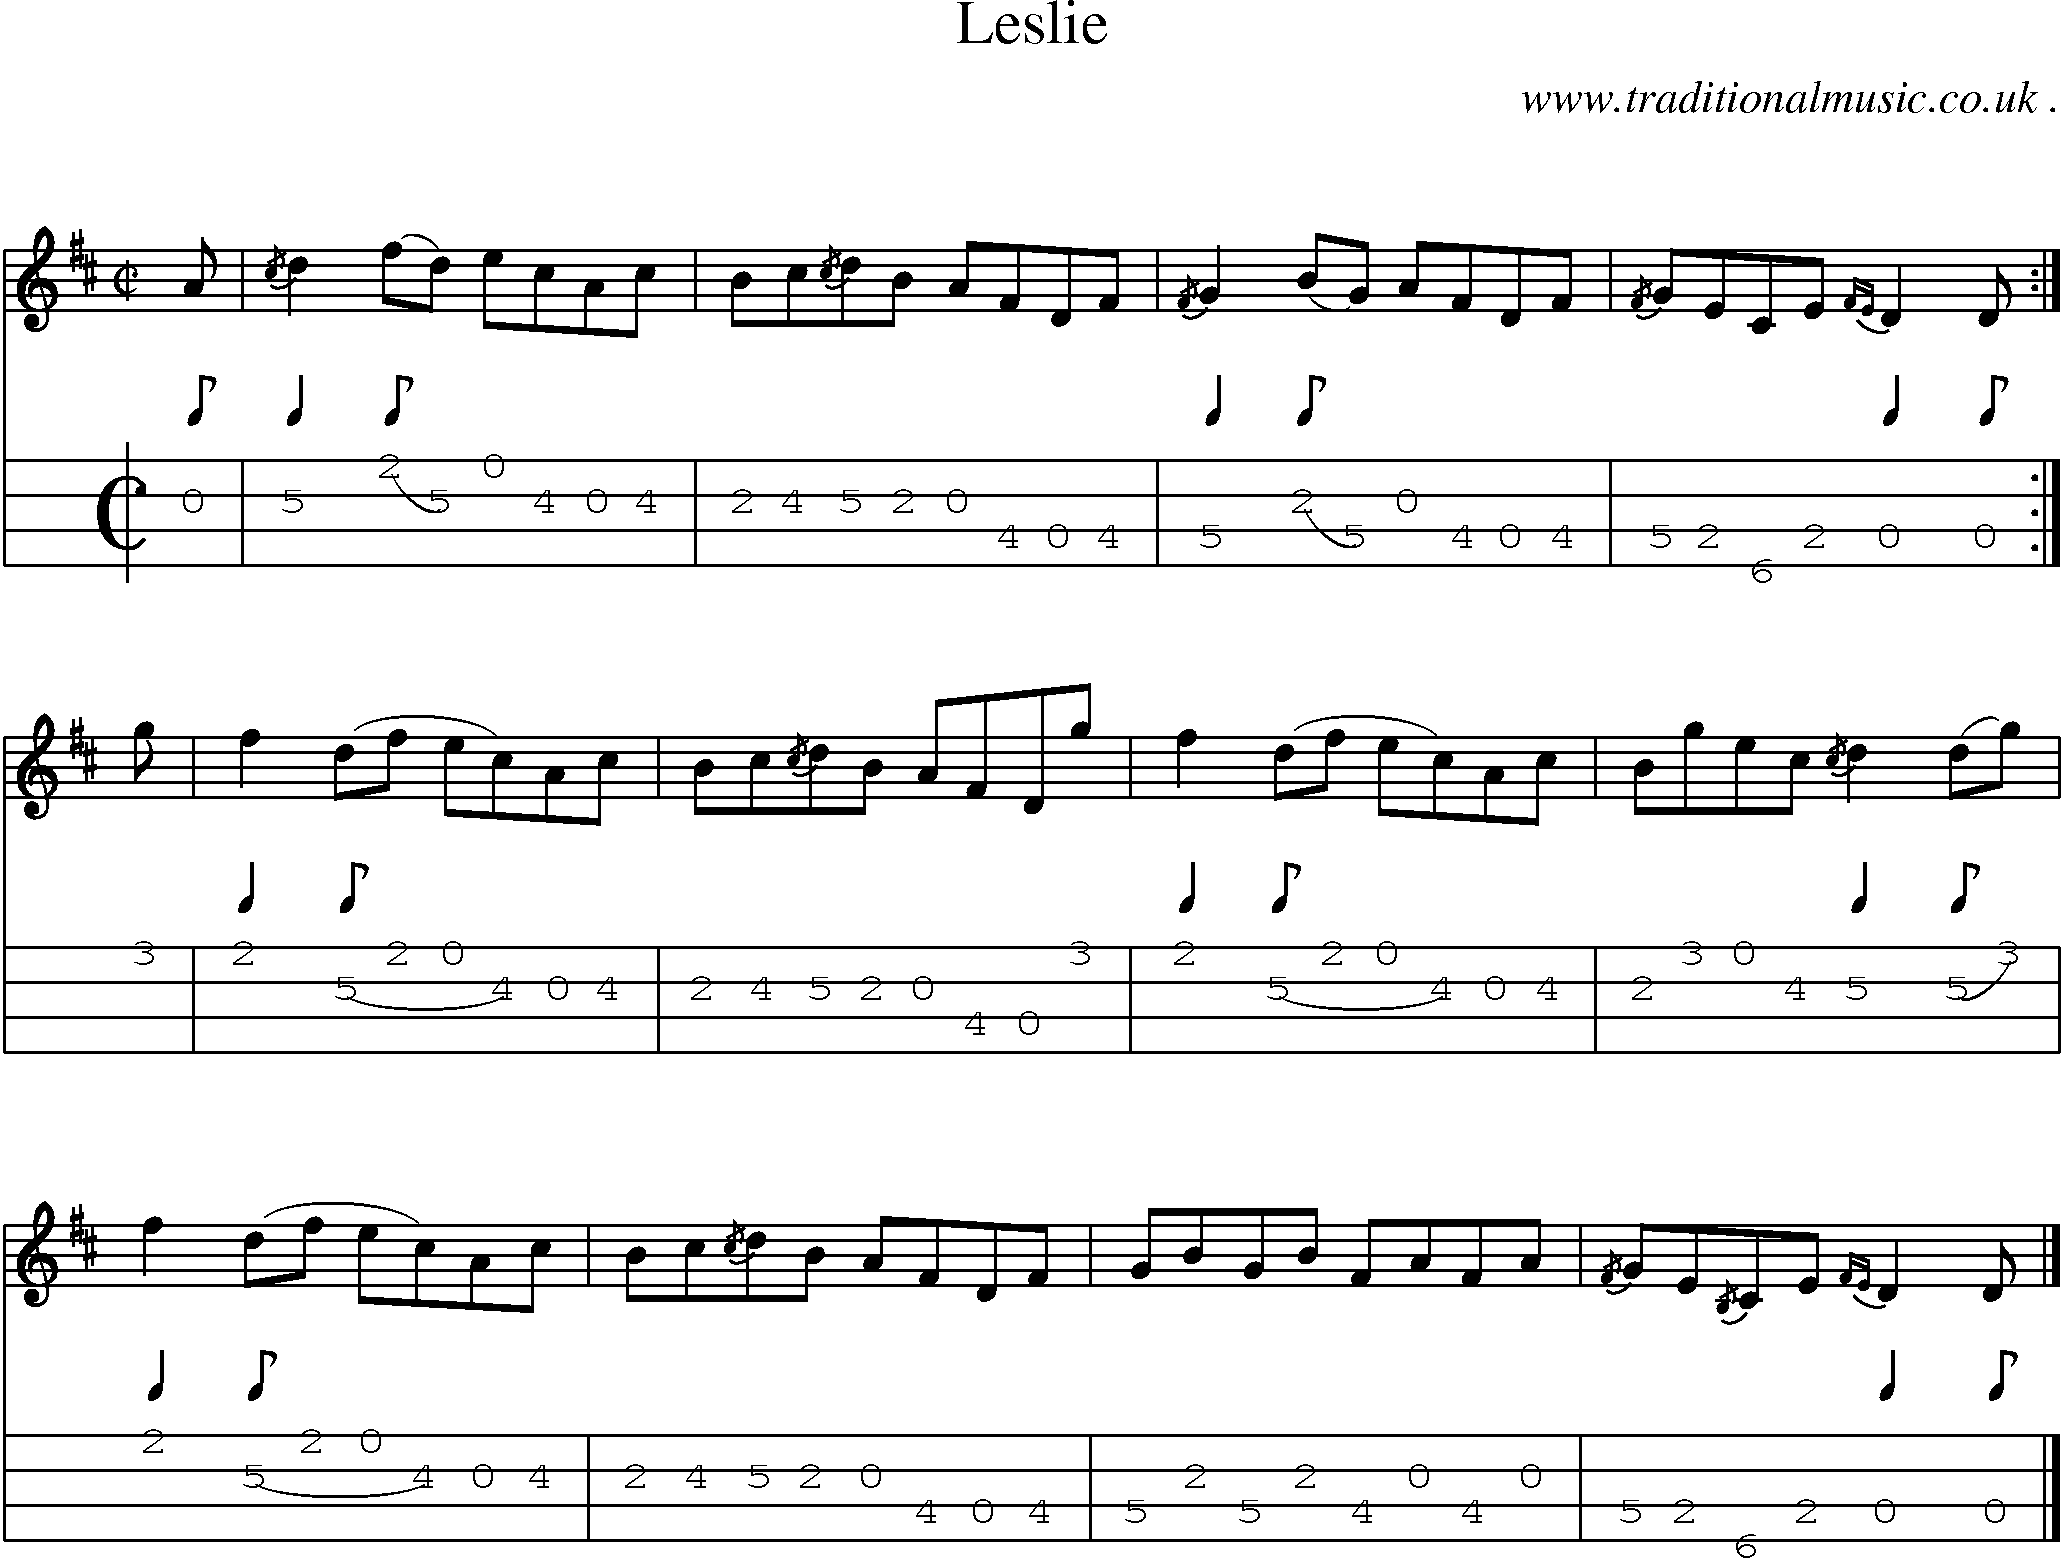 Sheet-music  score, Chords and Mandolin Tabs for Leslie